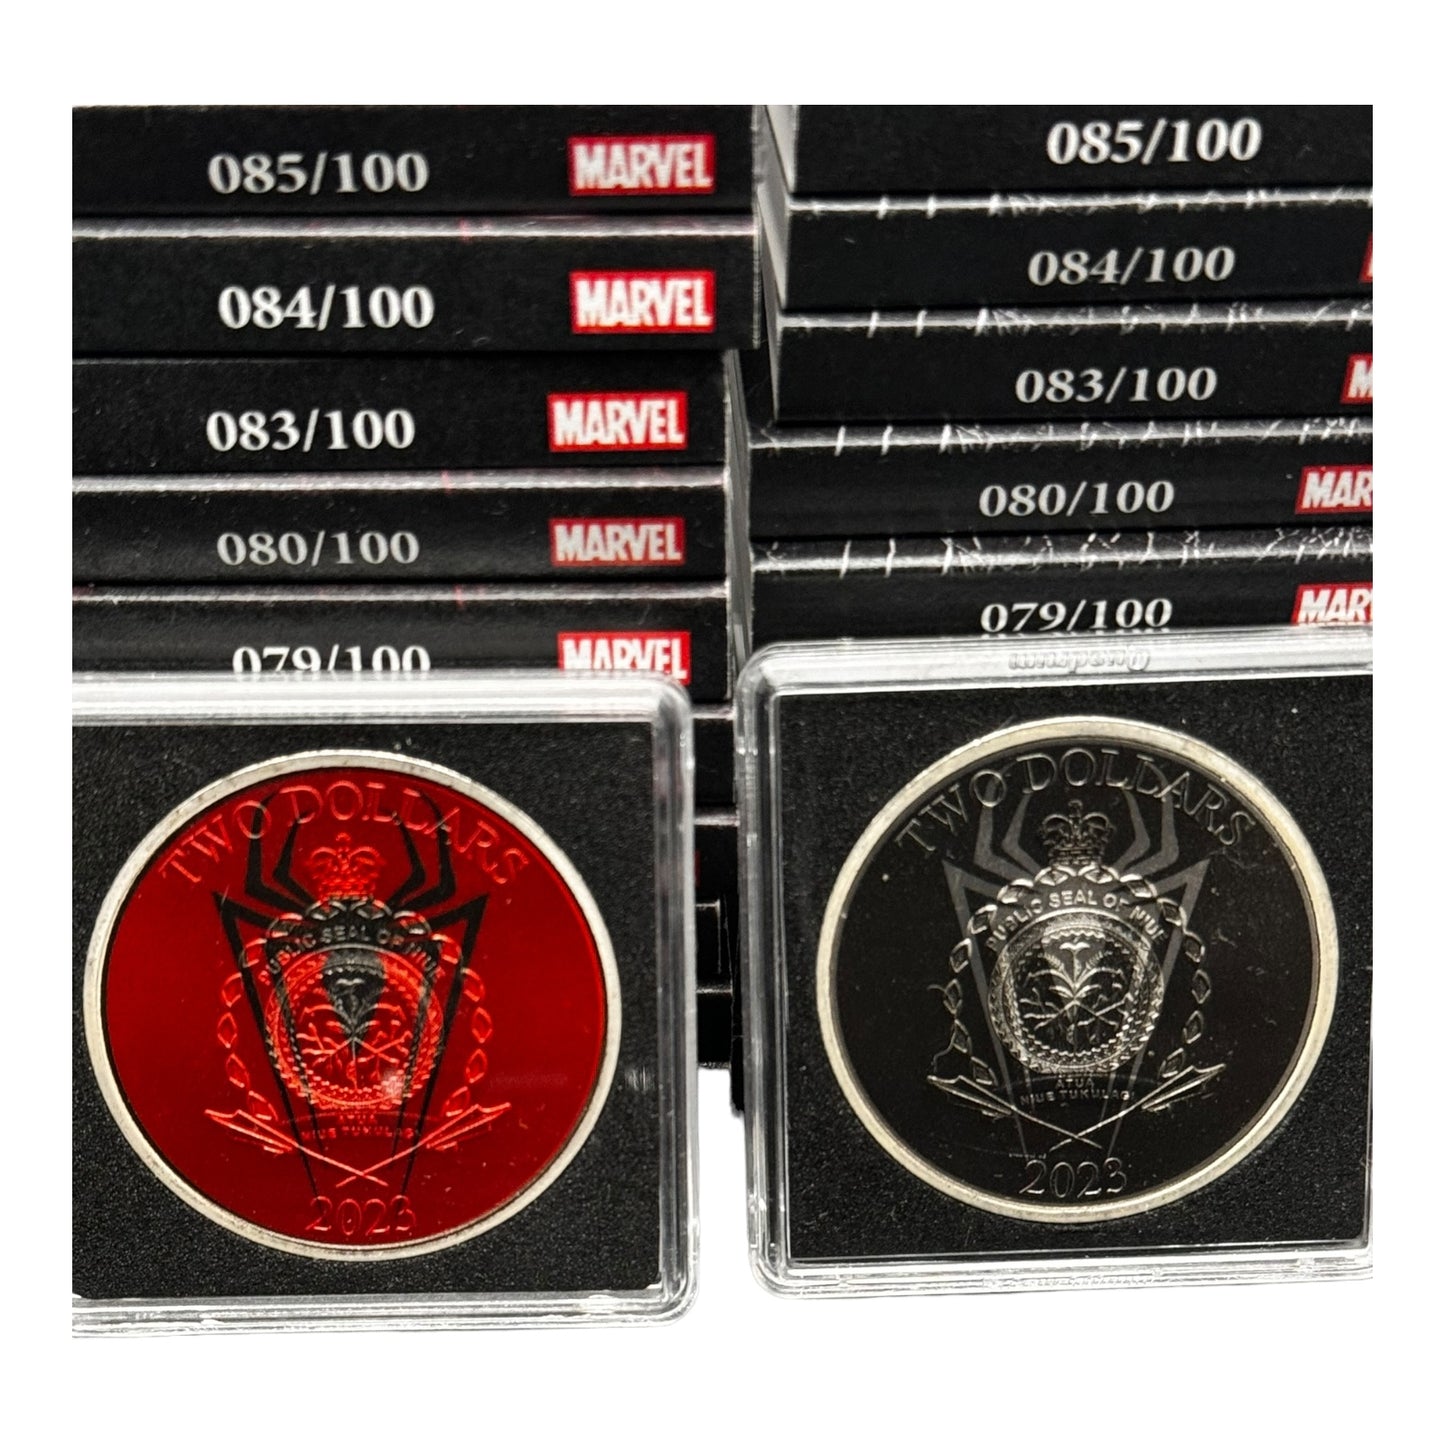 Pair .999 Silver Coins (2)-1oz Niue Spiderman Fully Colorized Proof Like